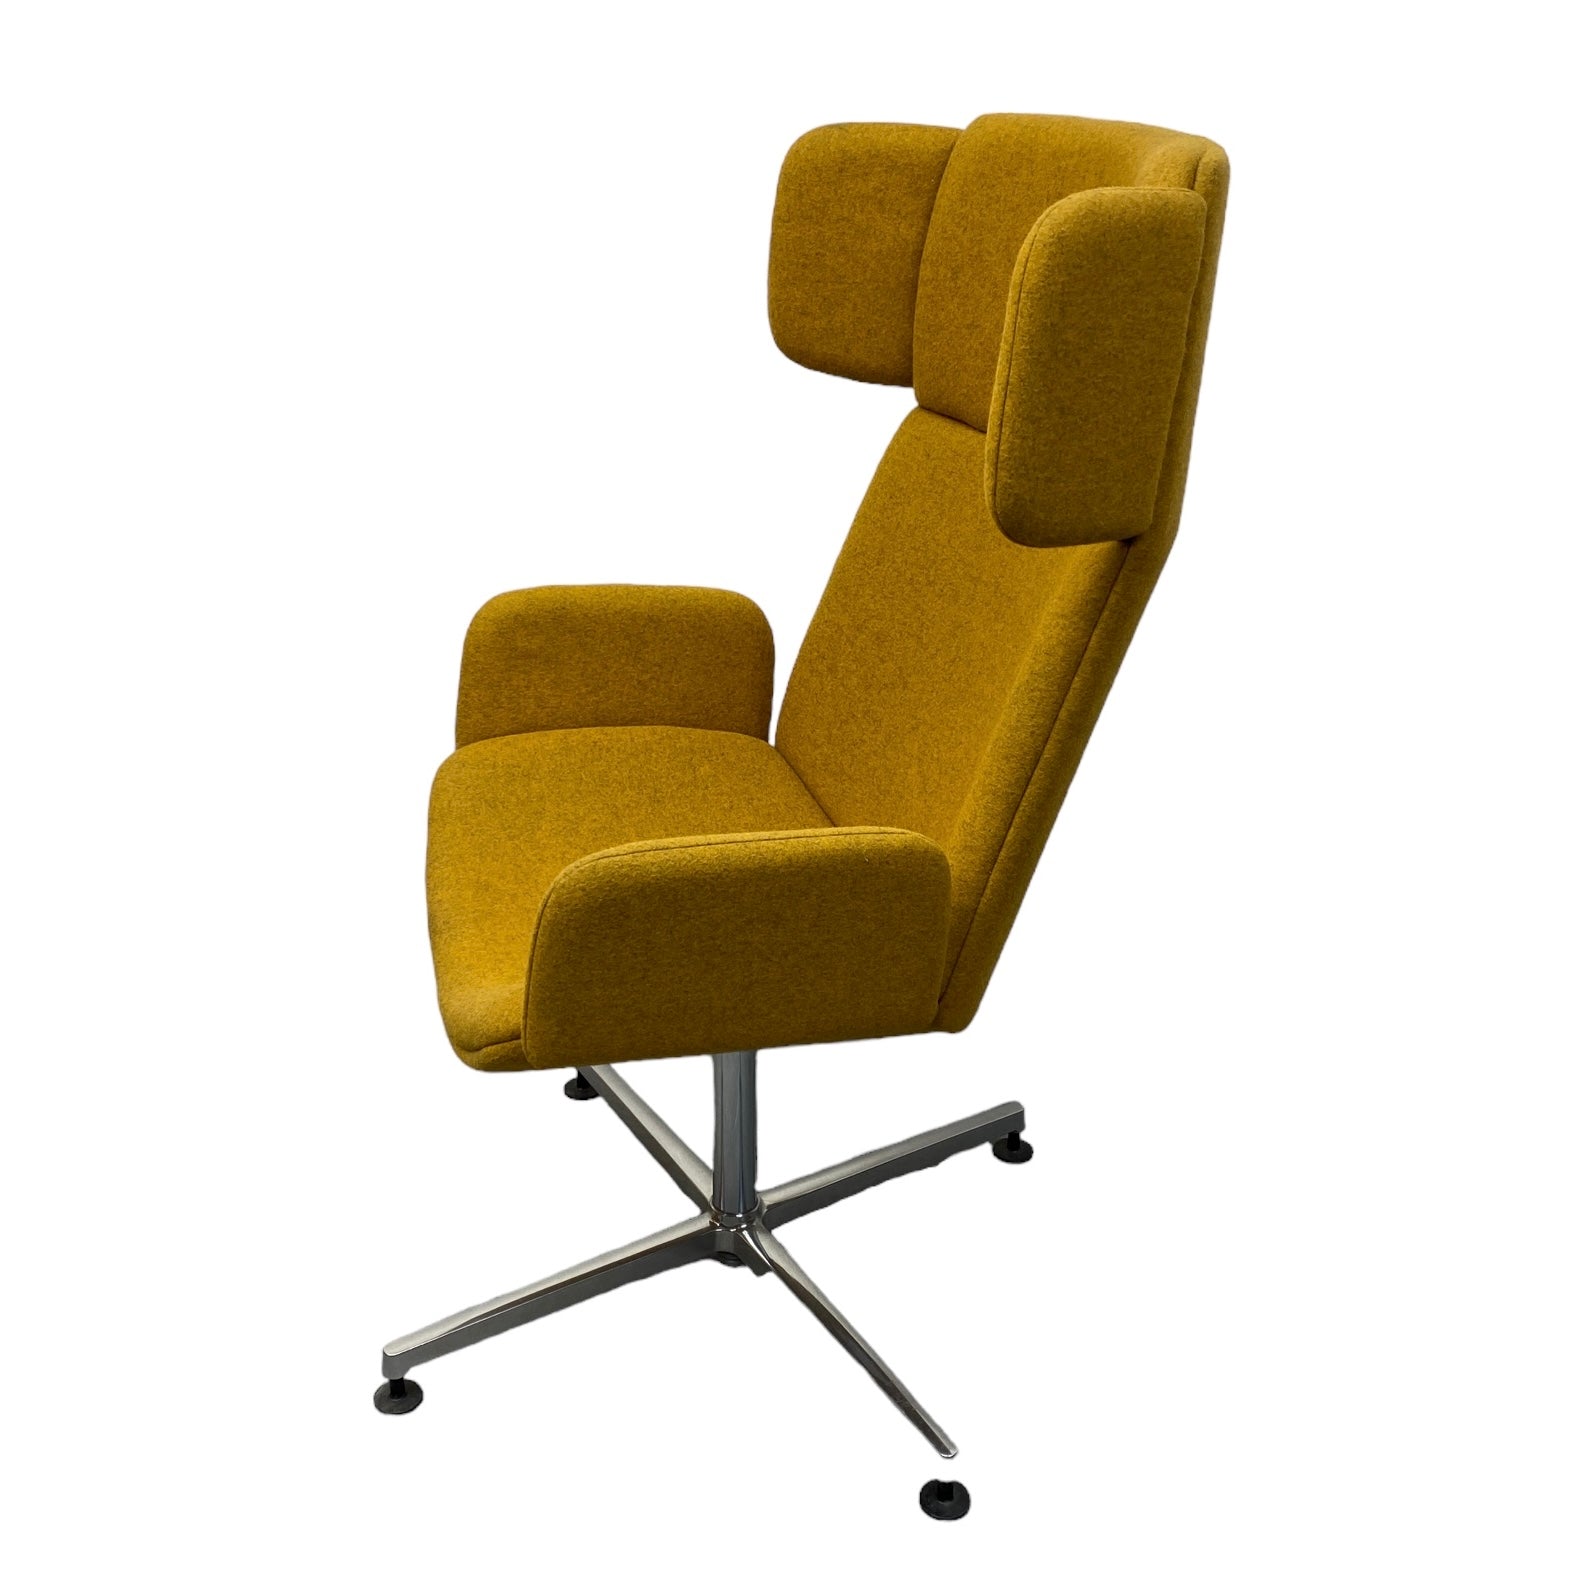 High backed Chair Swivel Chair Midcentury style 